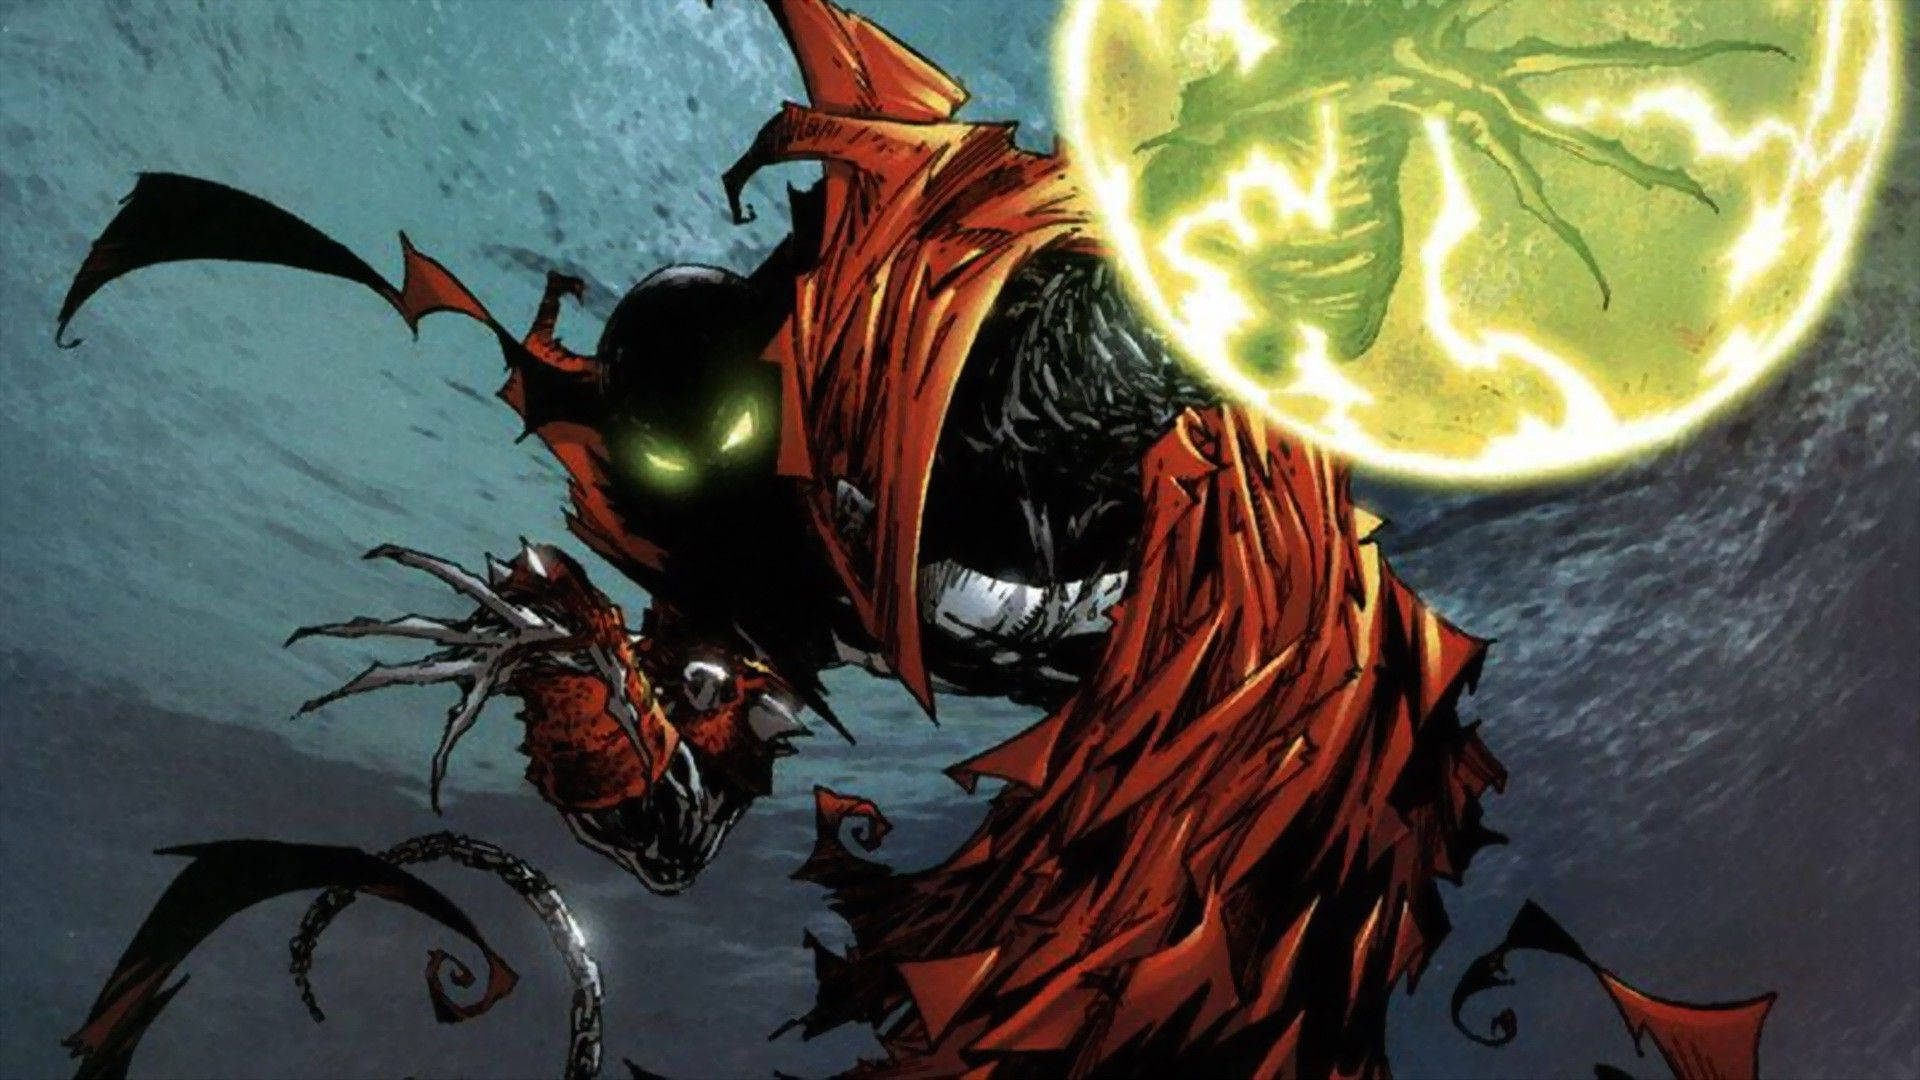 Sinister Moment with Spawn - The Powerful Anti-Hero of Comics Wallpaper